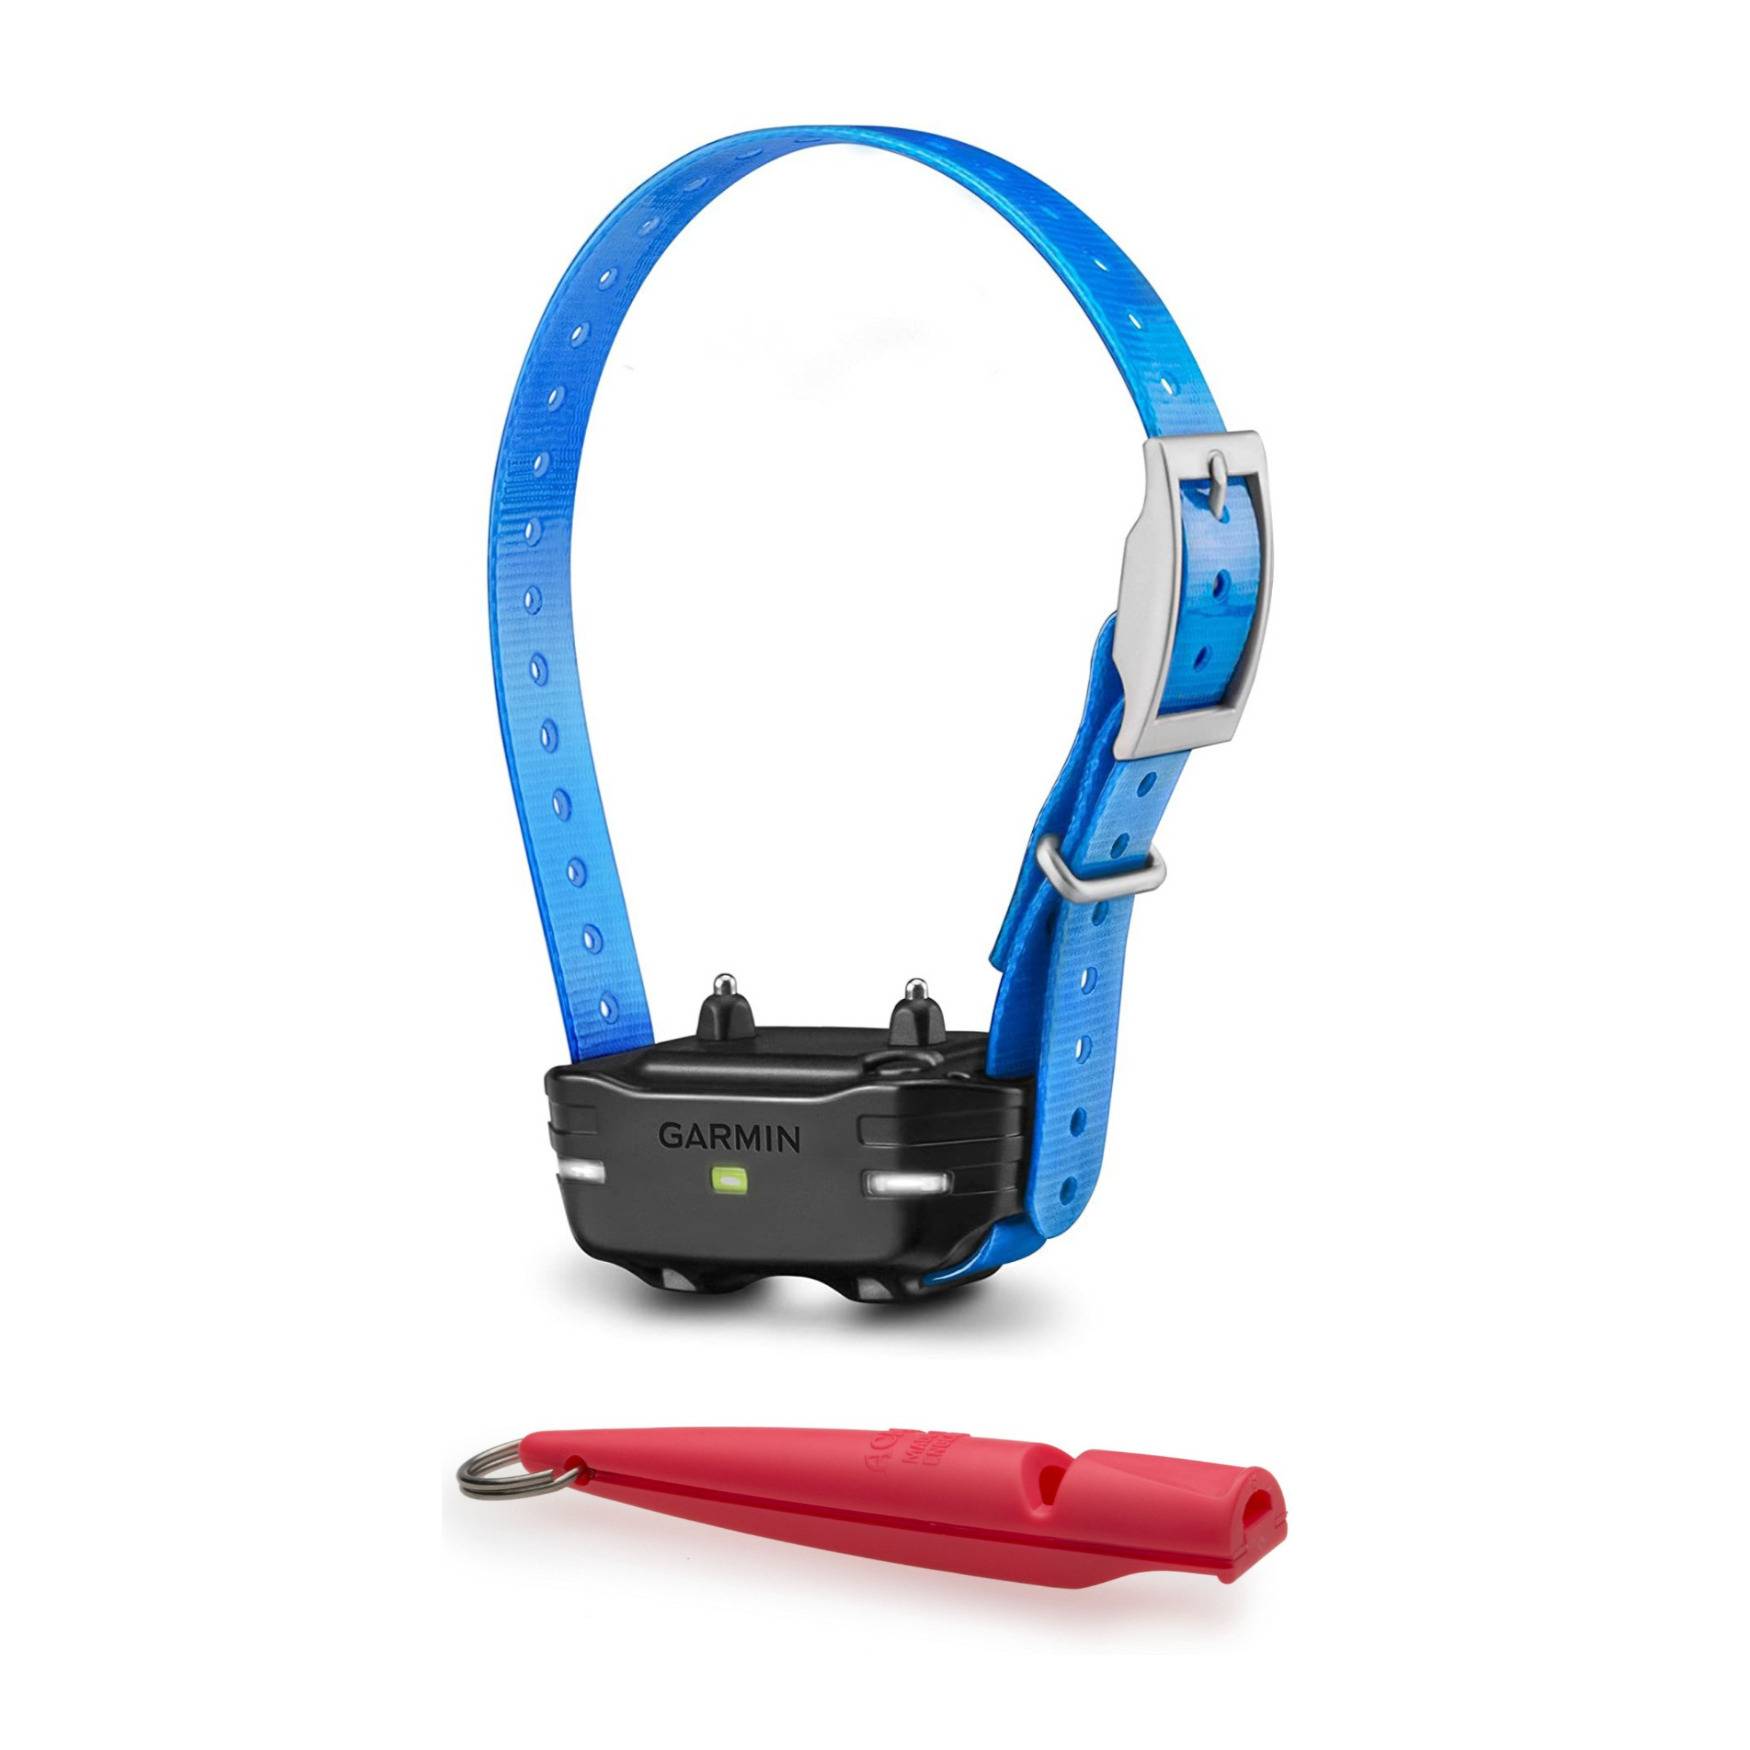 Garmin PT 10 Dog Device with Blue Collar Strap with Acme 211.5 Dog Whistle (Color May Vary) Bundle